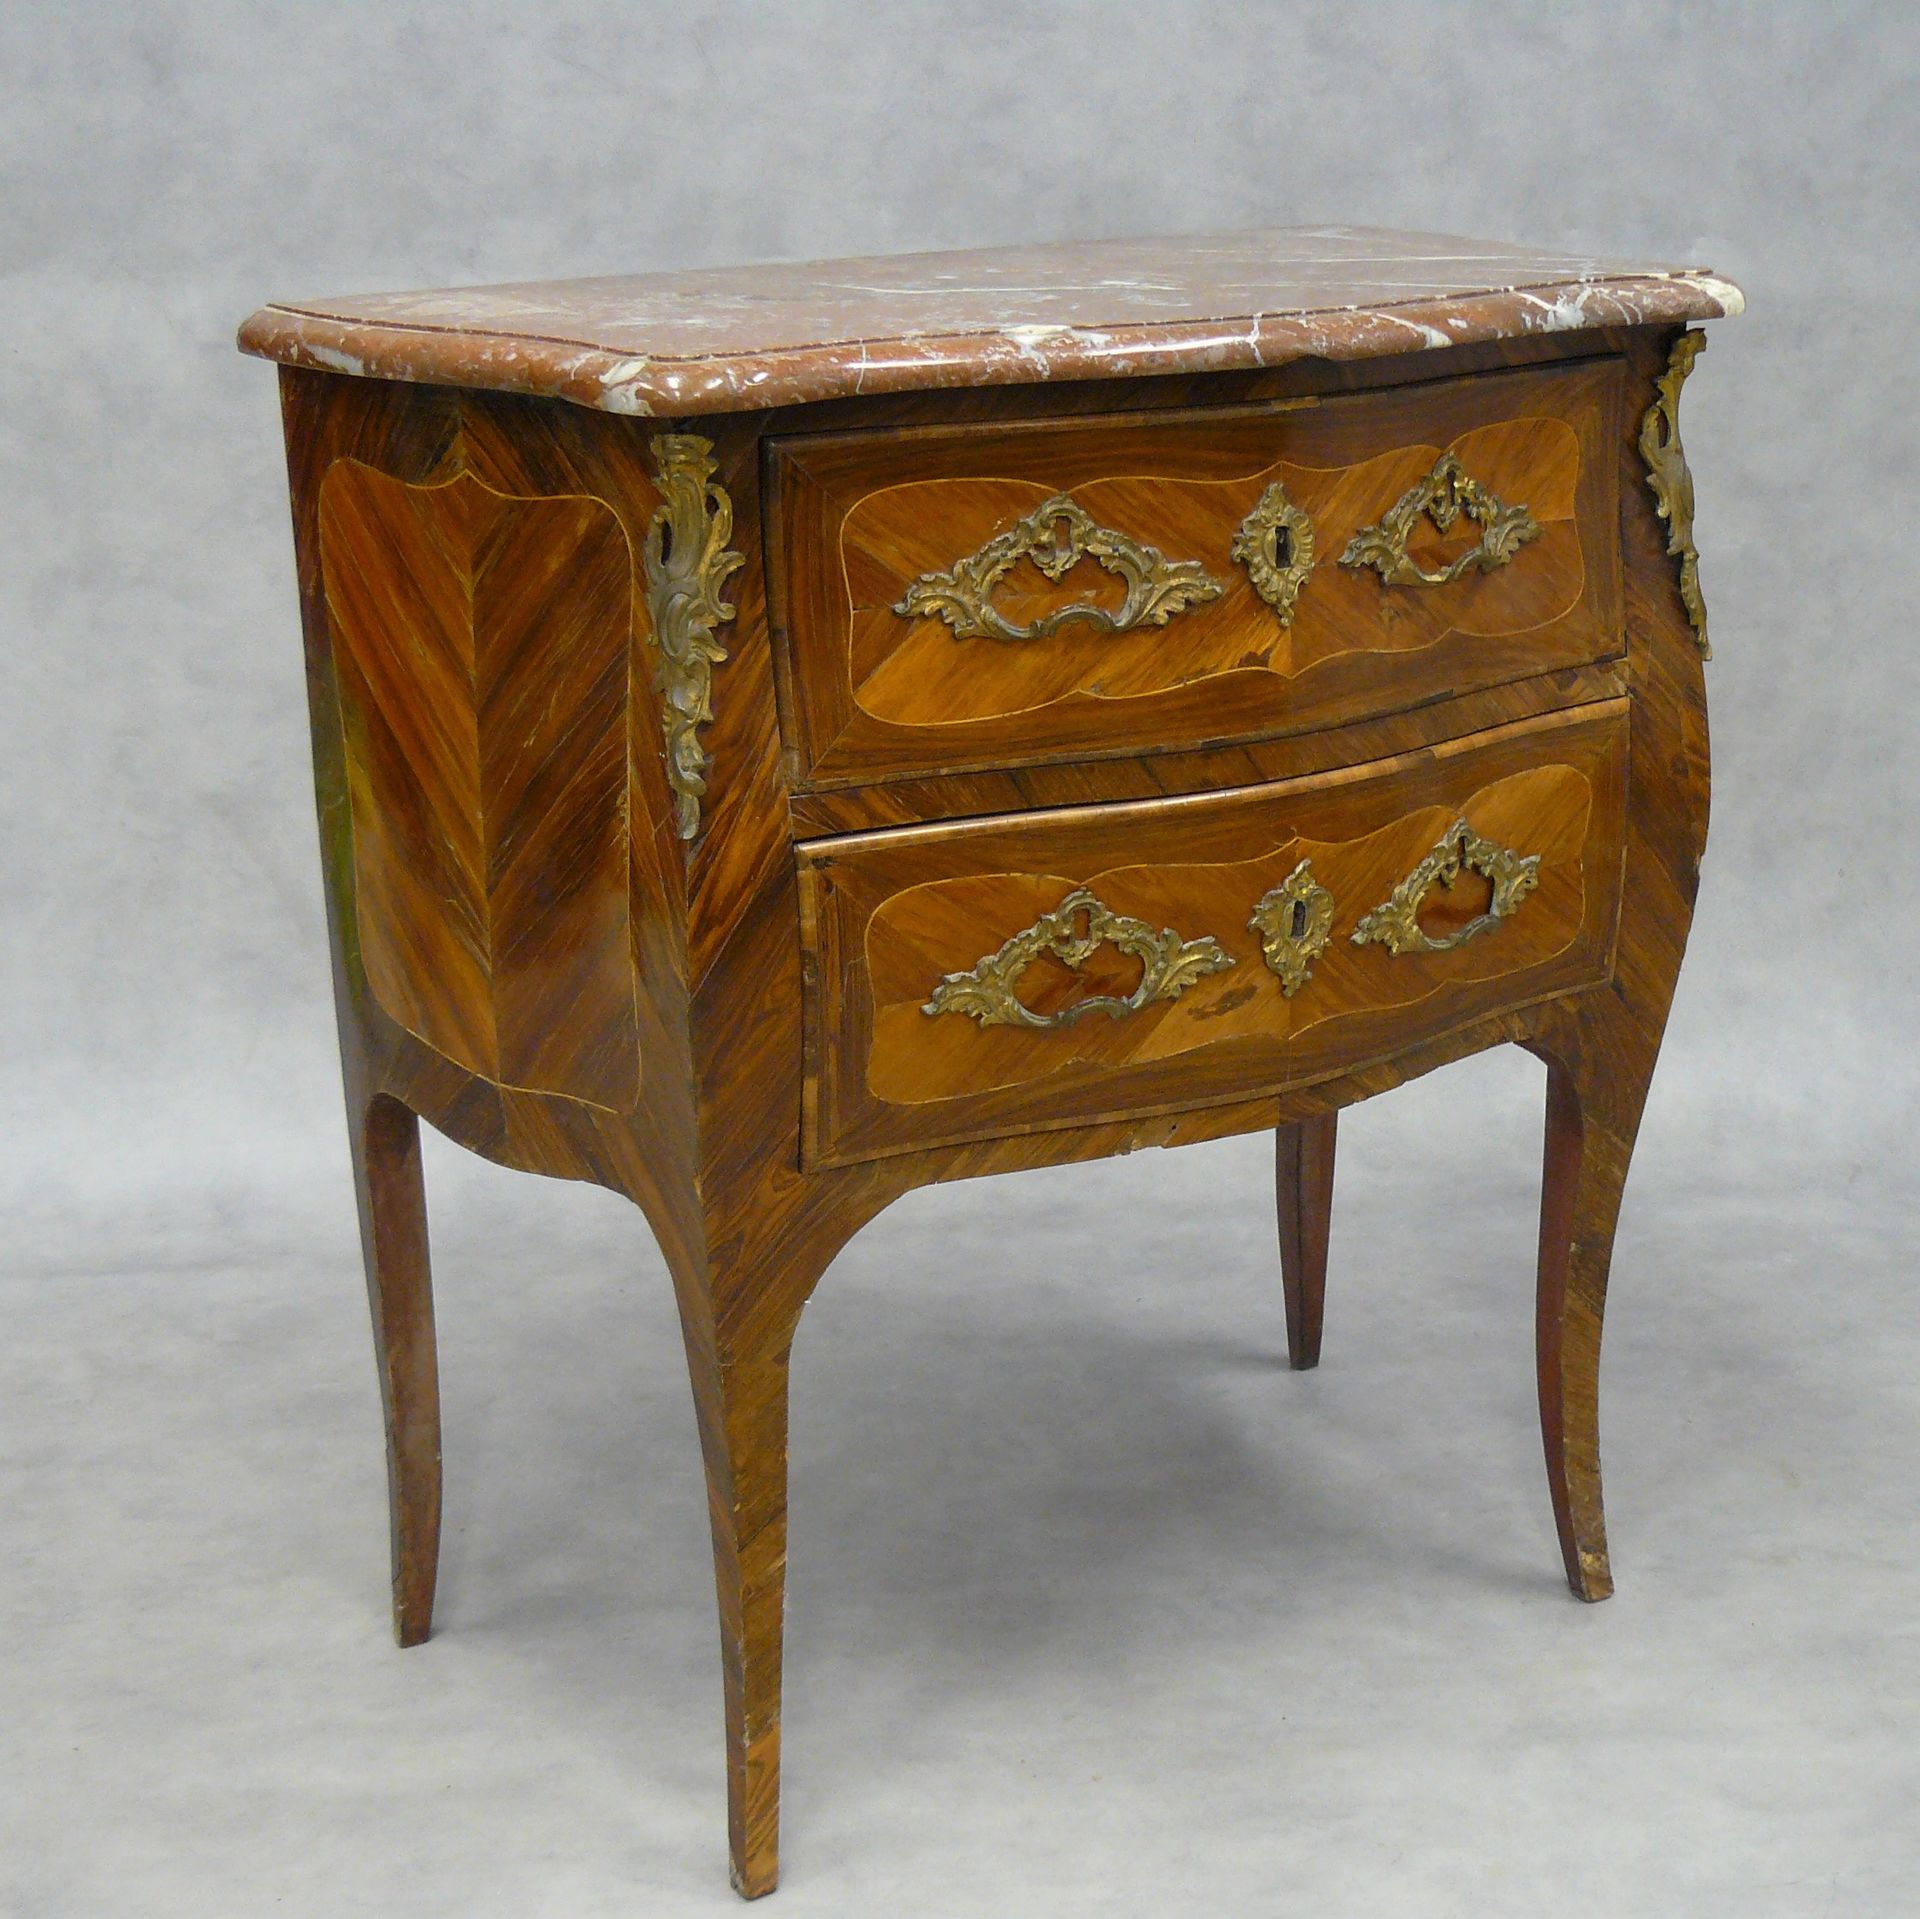 VILLEDIEU a small Louis XV chest of drawers in wood veneer inlaid with nets, ope&hellip;